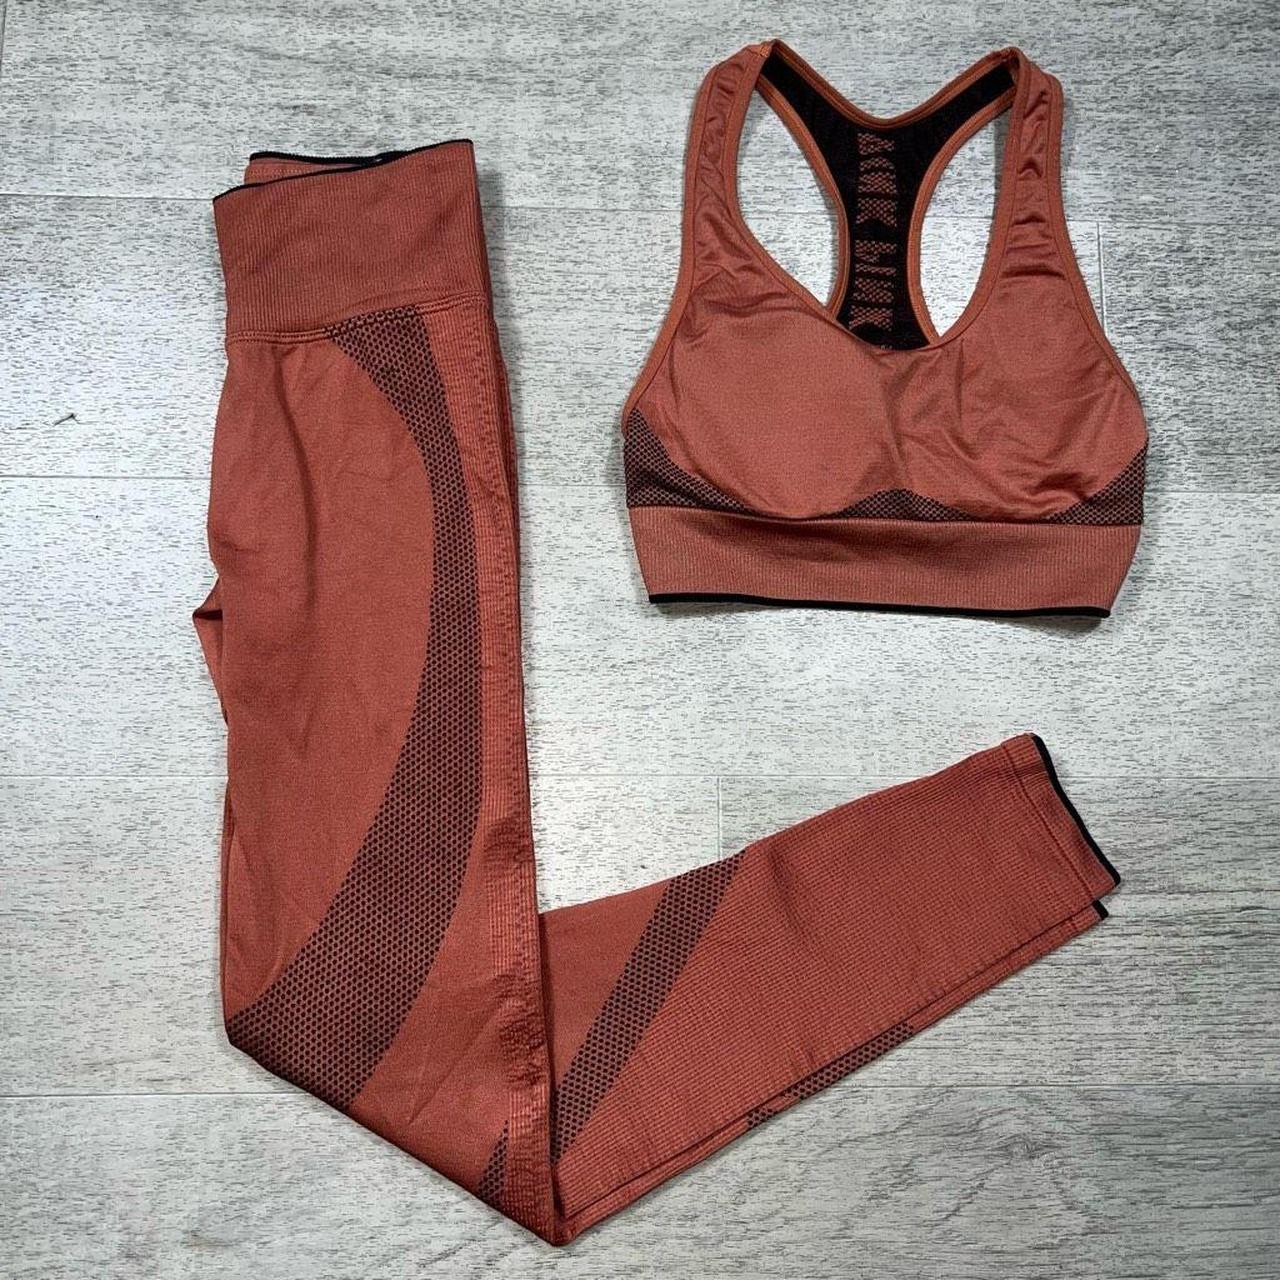 Pink ultimate leggings with matching sports bra. - Depop